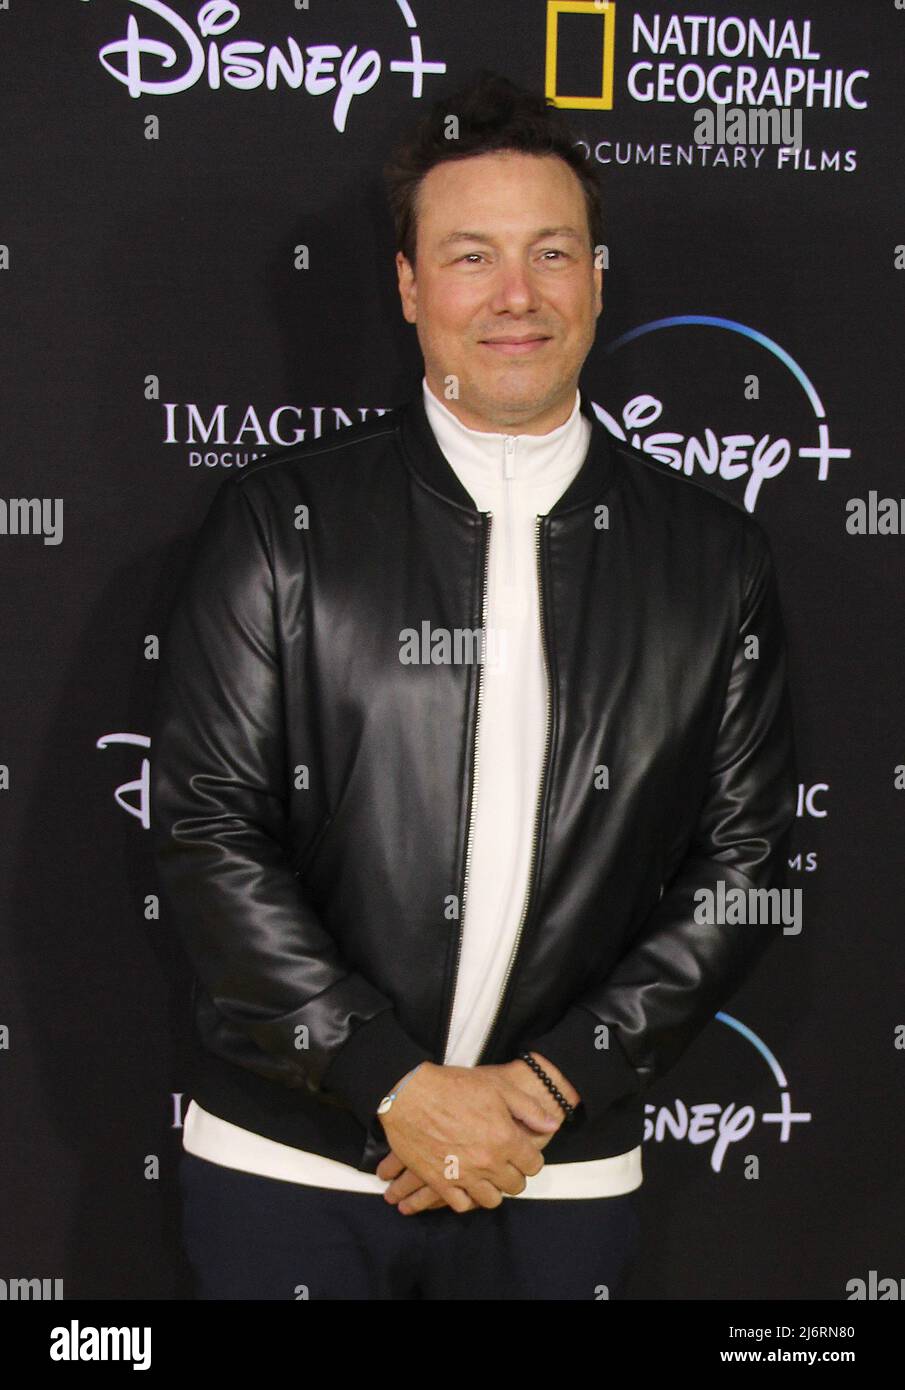 NEW YORK, NY - MAY 3: Rocco DiSpirito at the New York City Premiere Screening of National Geographic Documentary Films' We Feed People at SVA Theatre in New York City on May 3, 2022. Credit: Erik Nielsen/MediaPunch Credit: MediaPunch Inc/Alamy Live News Stock Photo